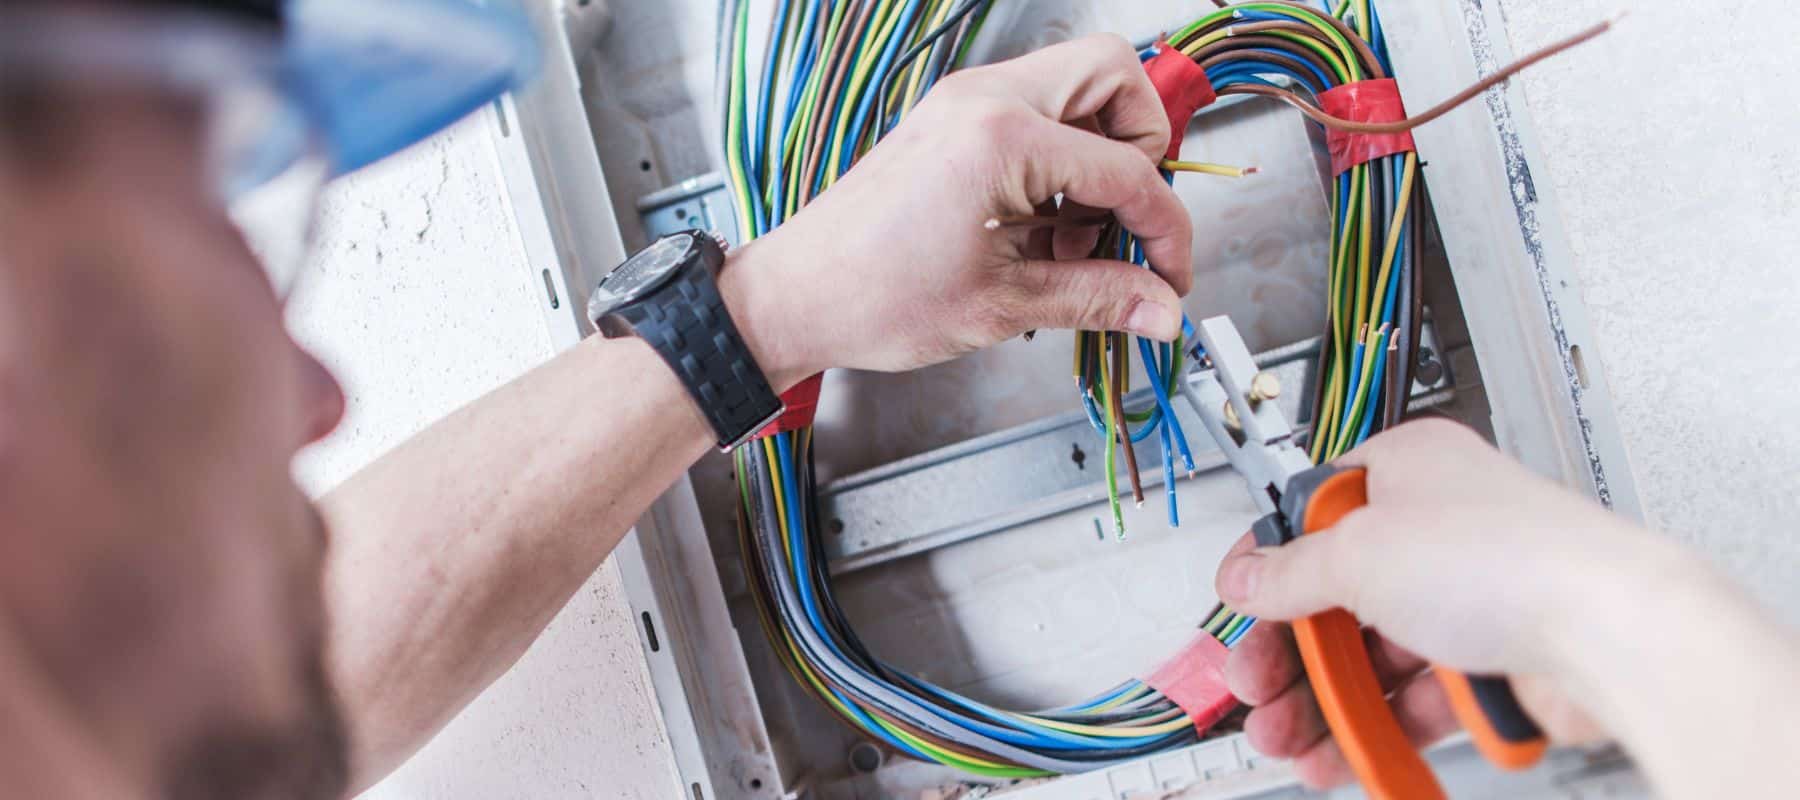 electrician using a clamp to perform repairs on colorful electrical wires in a electrical box